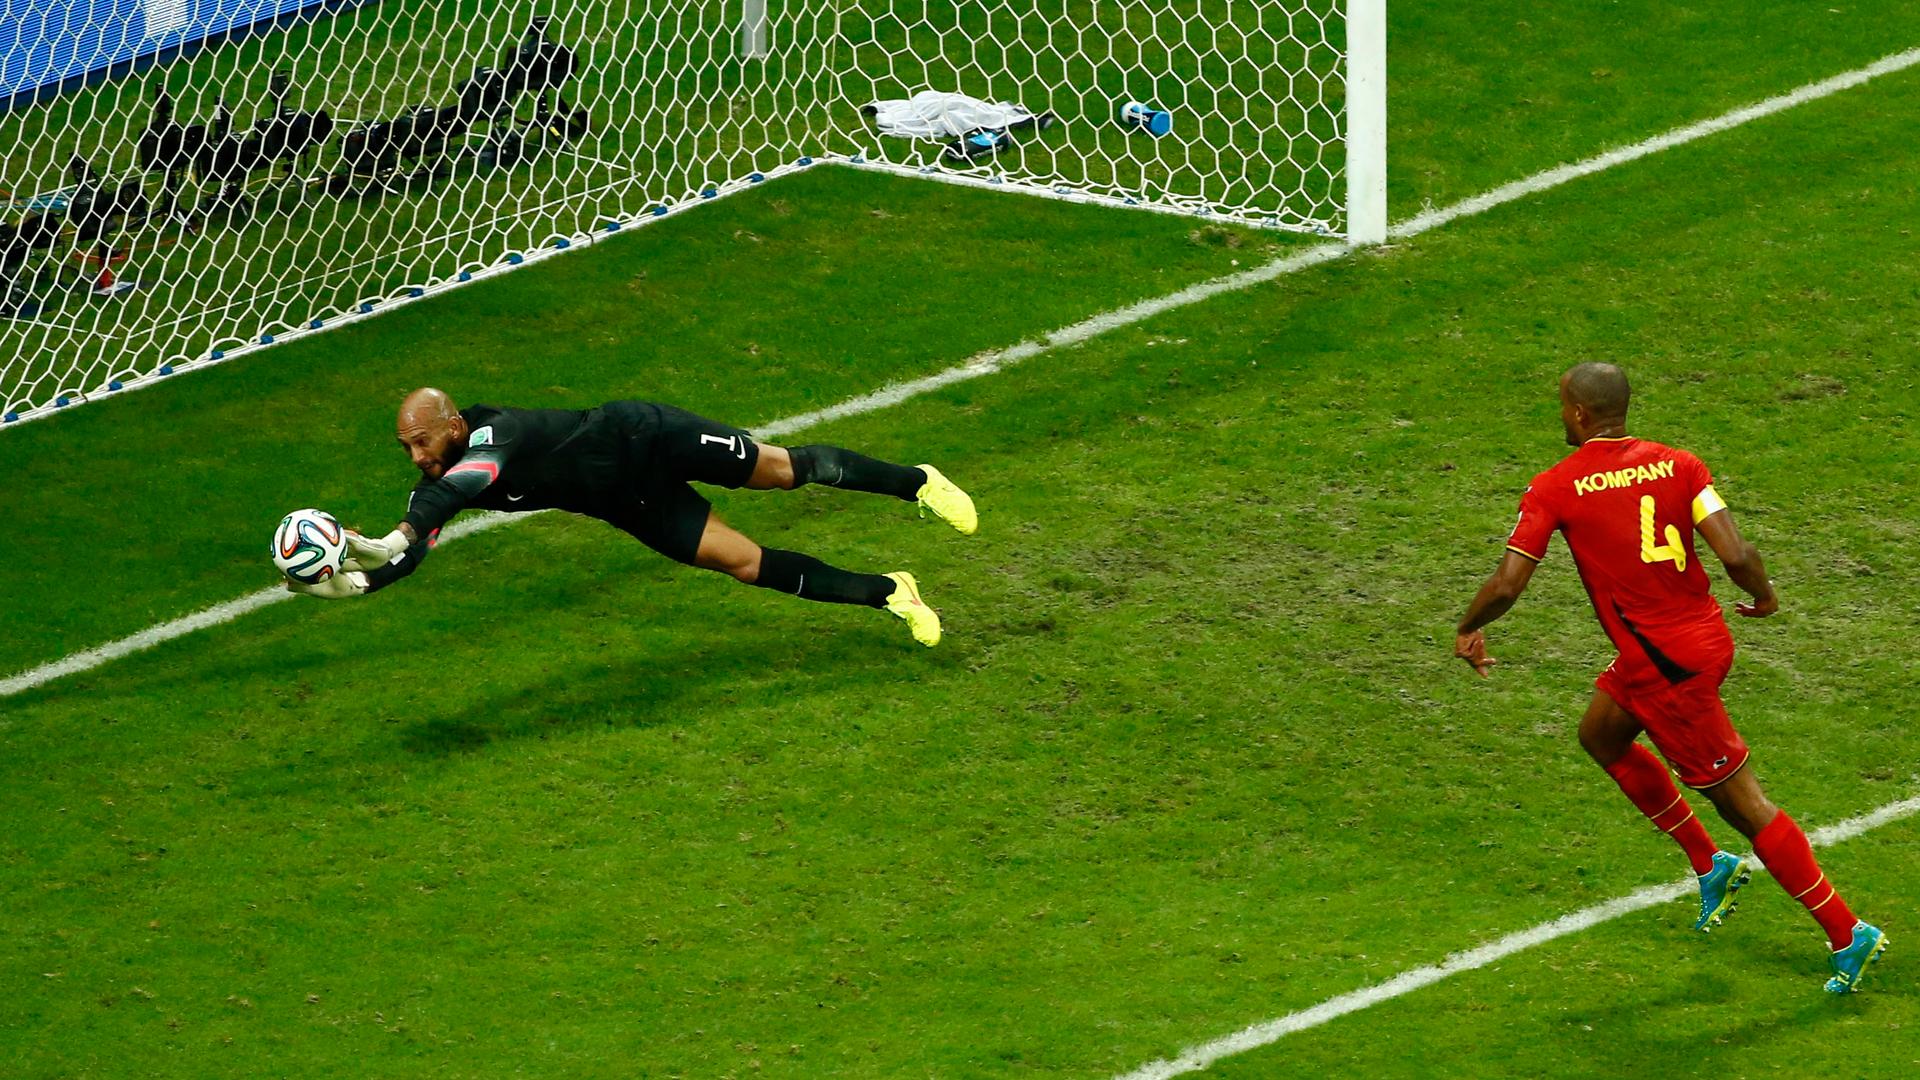 Goalkeeper Tim Howard of the U.S. saves a shot during their 2014 World Cup round of 16 game against Belgium at the Fonte Nova arena in Salvador July 1, 2014.